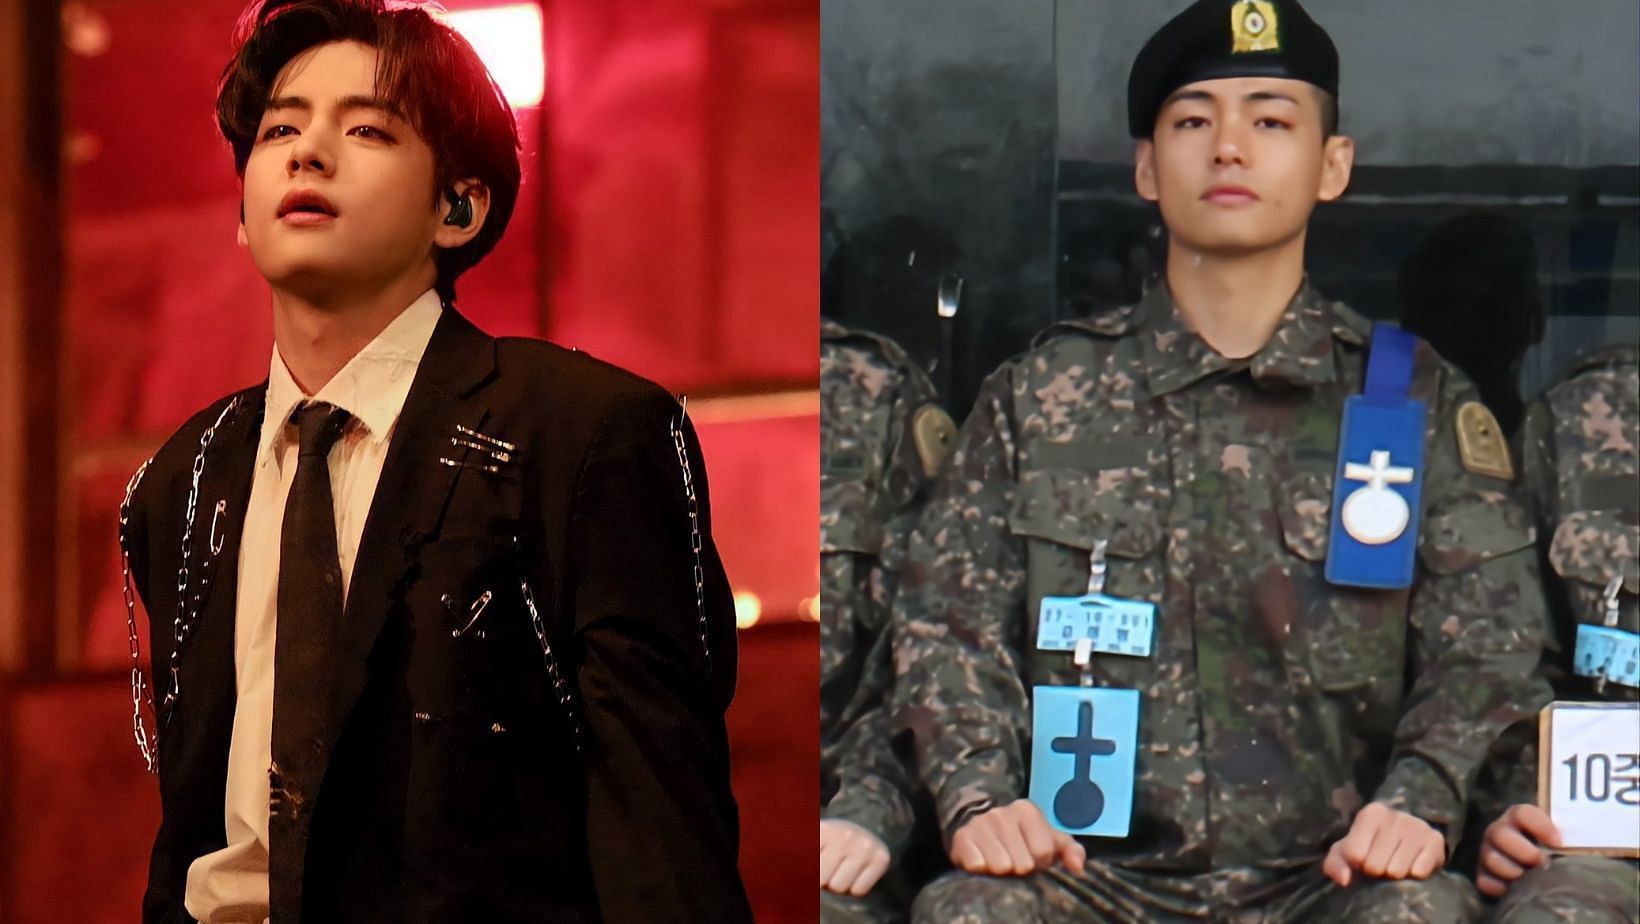 Featuring Kim Taehyung of BTS designated as Platoon Leader in the South Korean military 10th division. (Images via X/@Bts_ot7_sk @SnowBuffering)